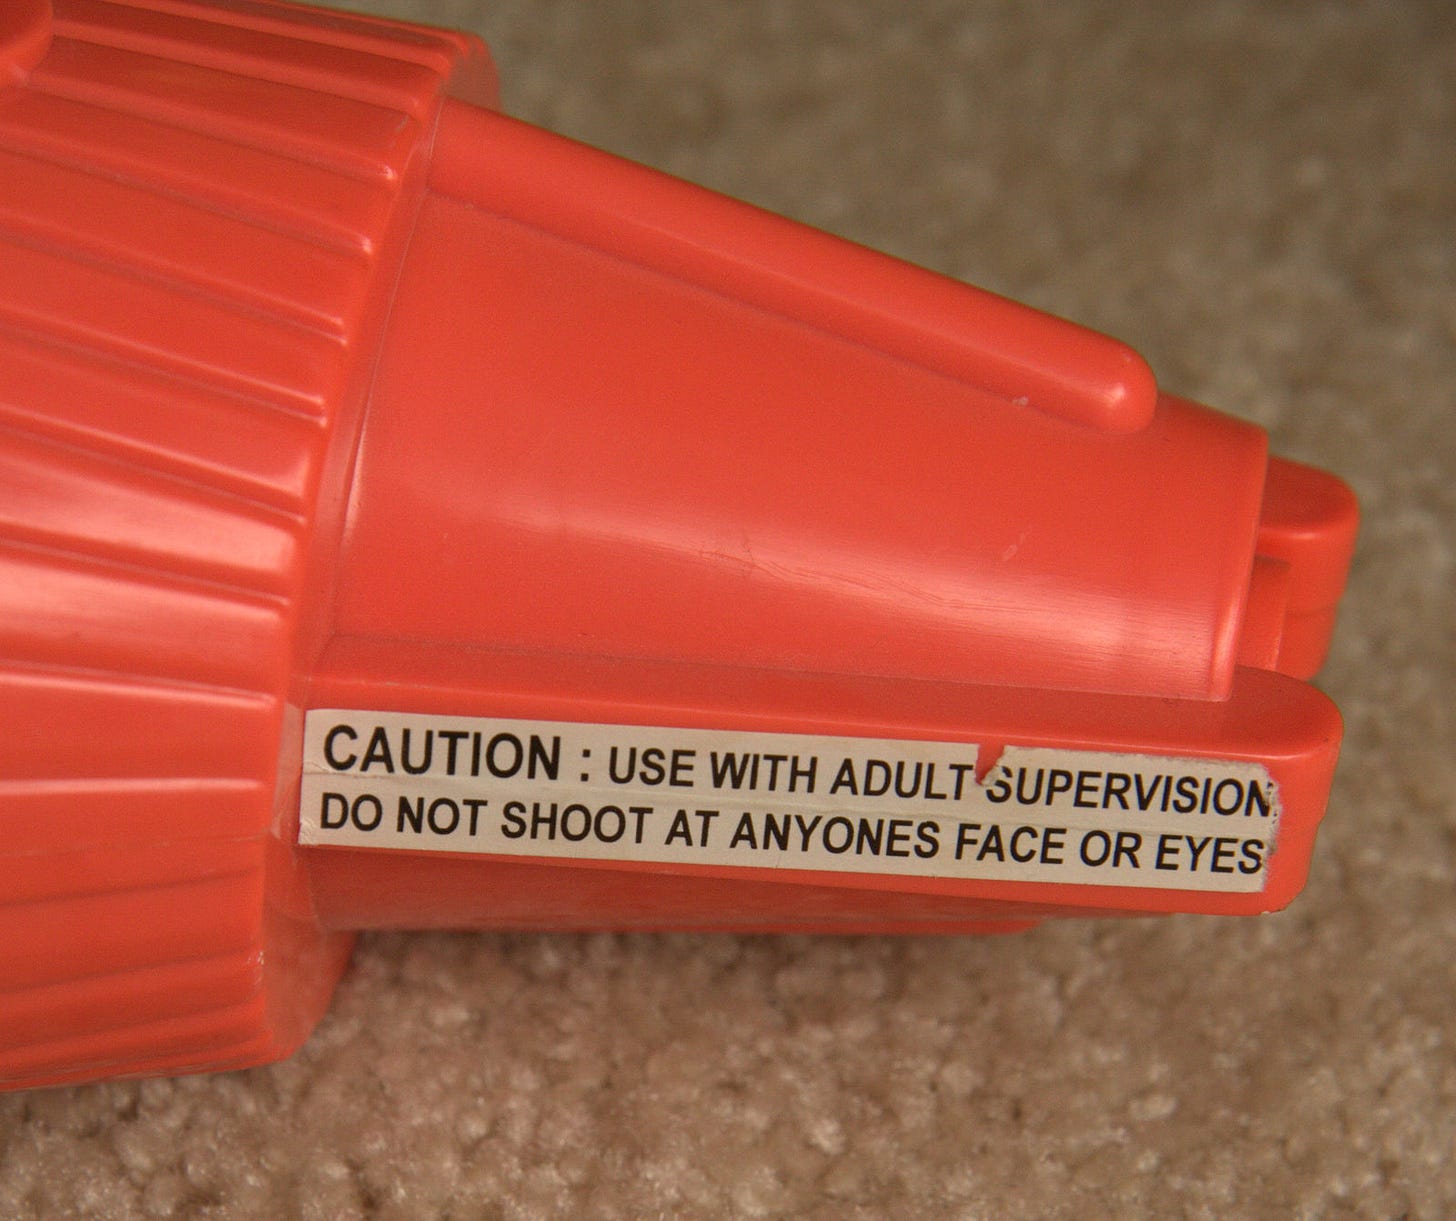 A bright orange cap with a sticker on it that says "Caution: use with adult supervision do not shoot at anyones face or eyes"